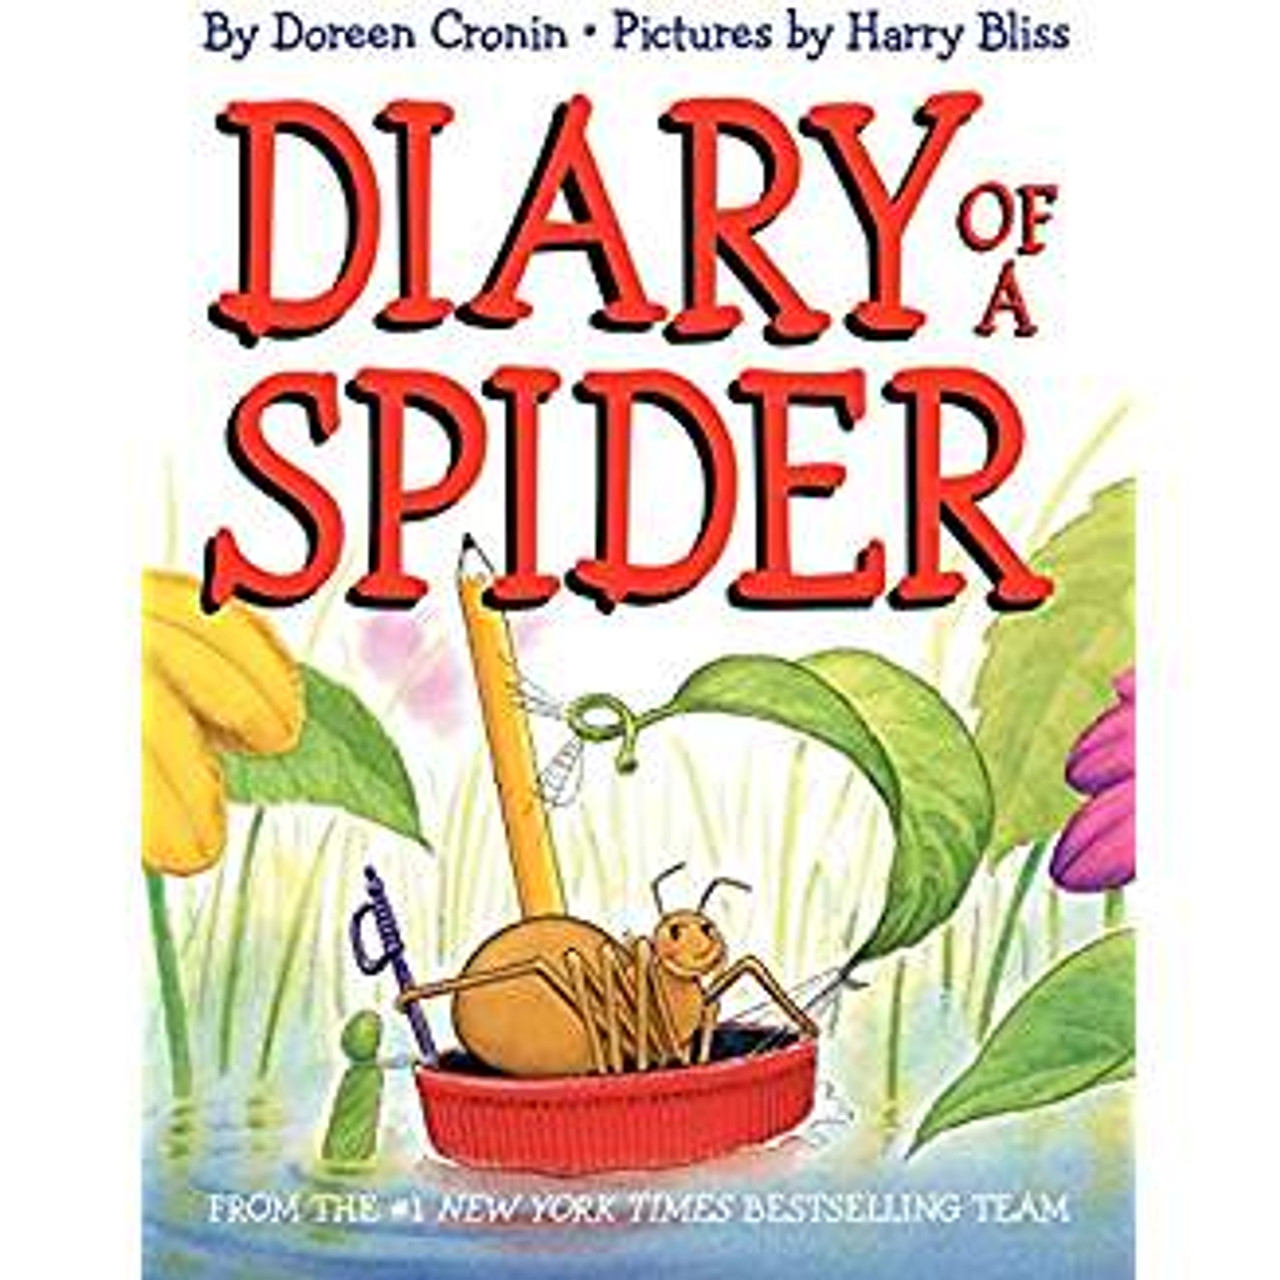 A young spider discovers, day by day, that there is a lot to learn about being a spider, including how to spin webs and avoid vacuum cleaners